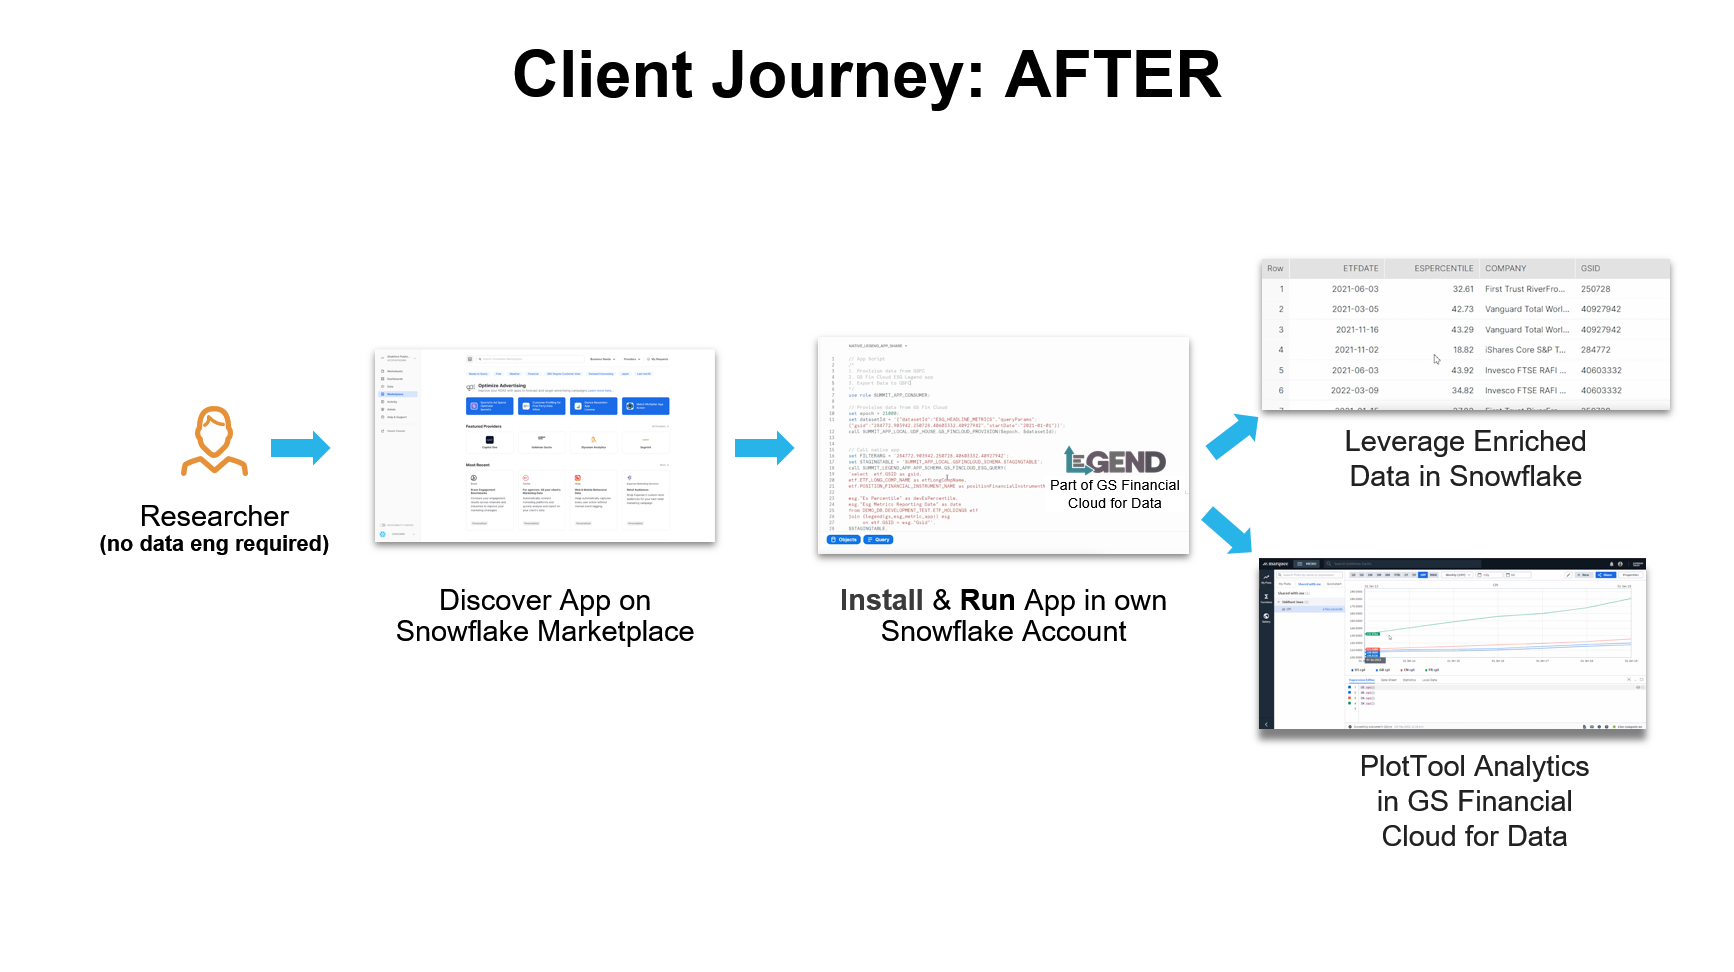 After: Client Journey map as described in the text above. 